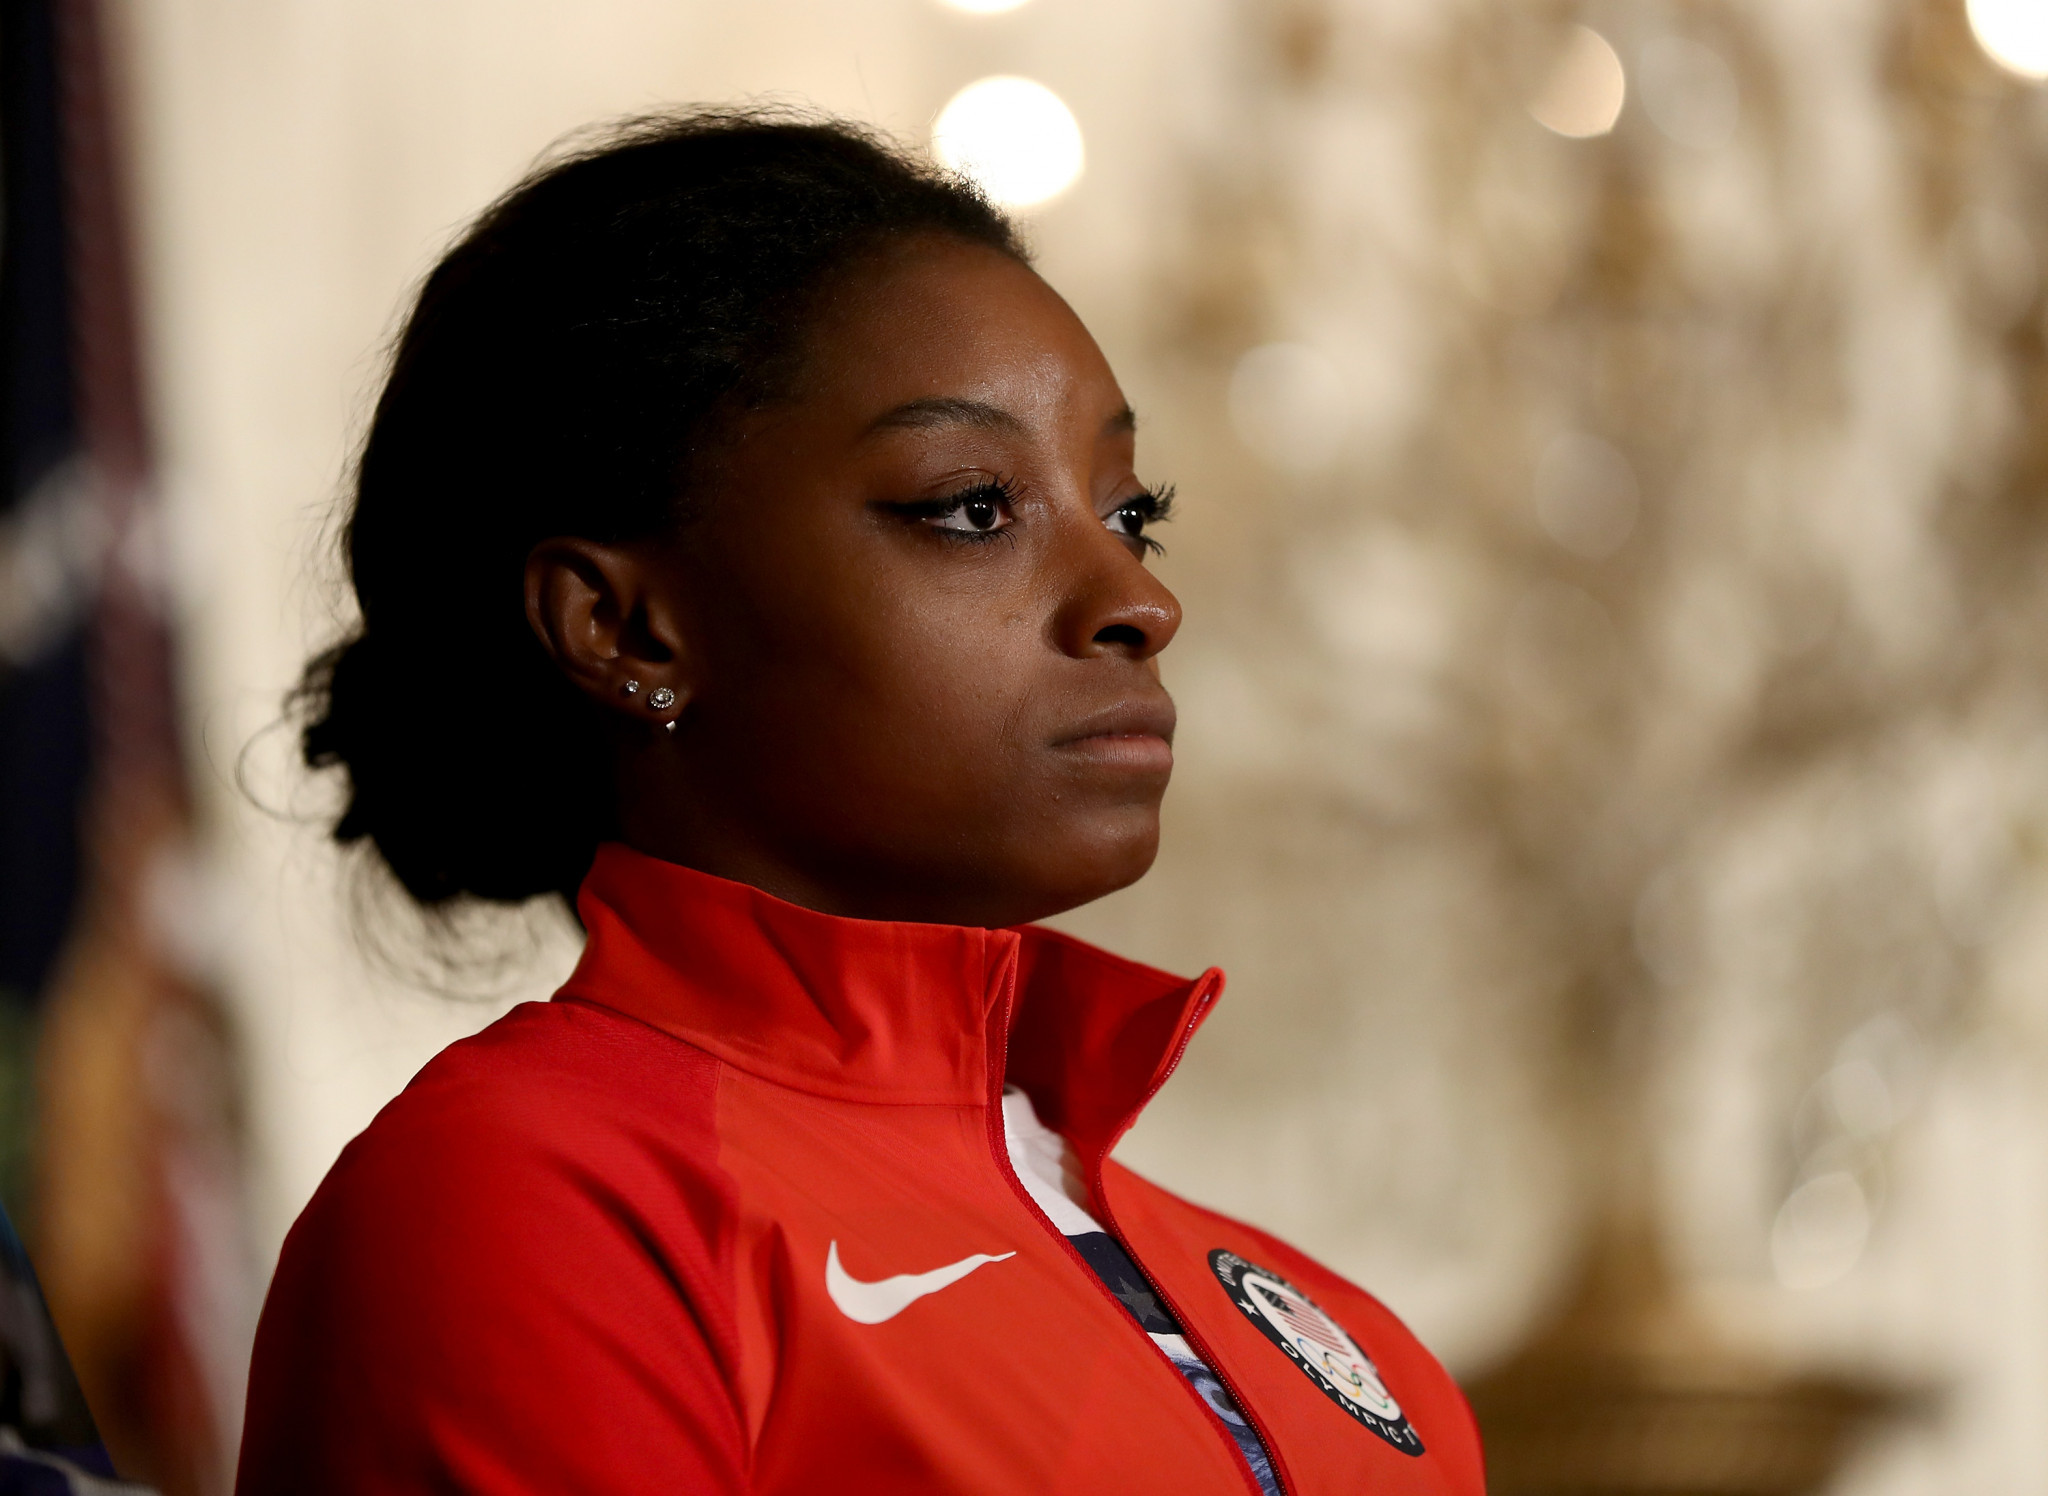 Four-time Olympic champion Biles says she was victim of sexual abuse by Nassar